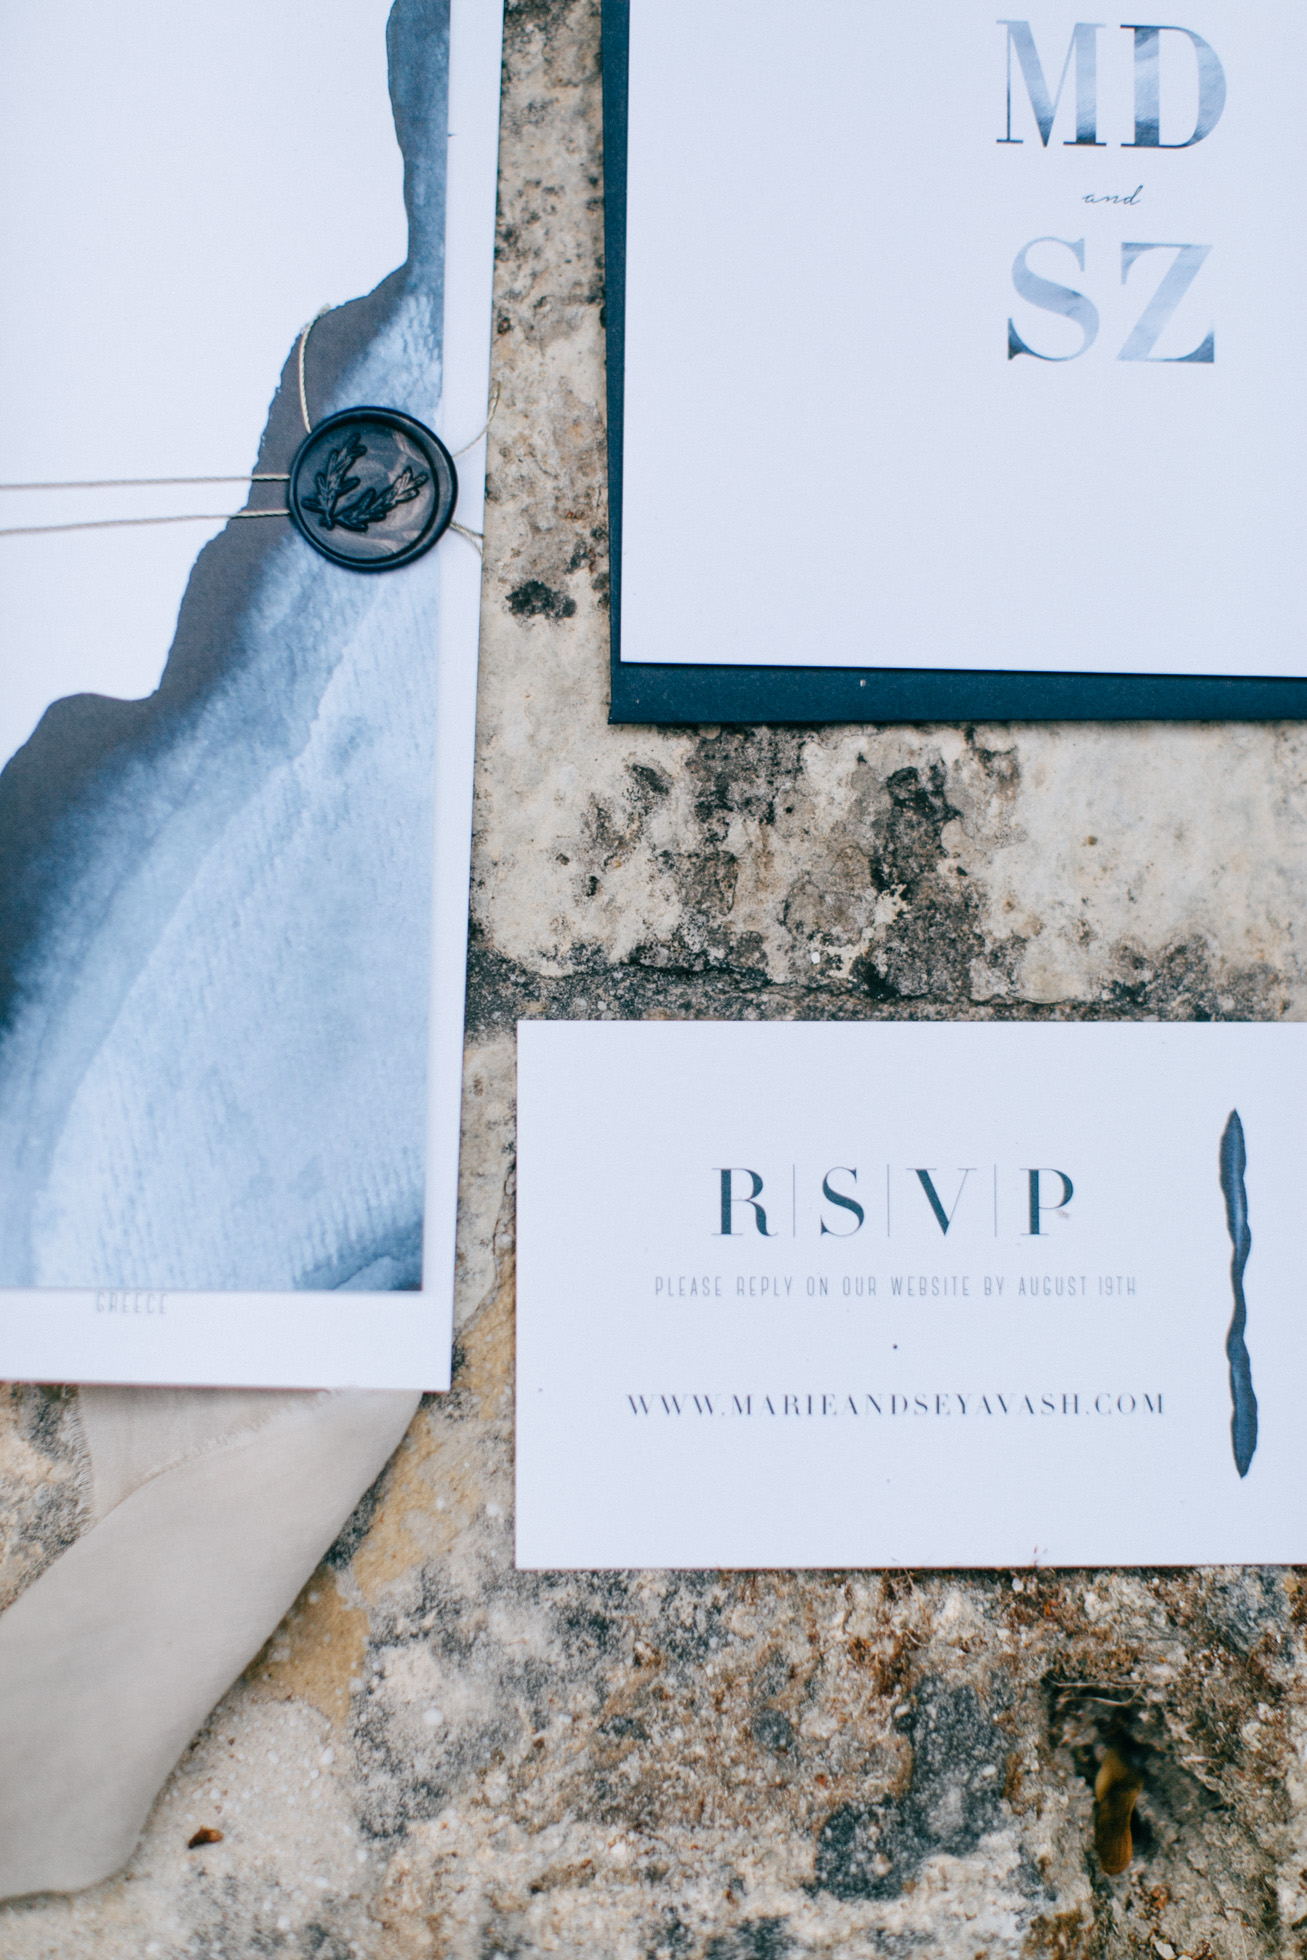 Image of a designer wedding stationery styled and photographed on a wedding day in Metohi Kindelis, Chania, Crete.